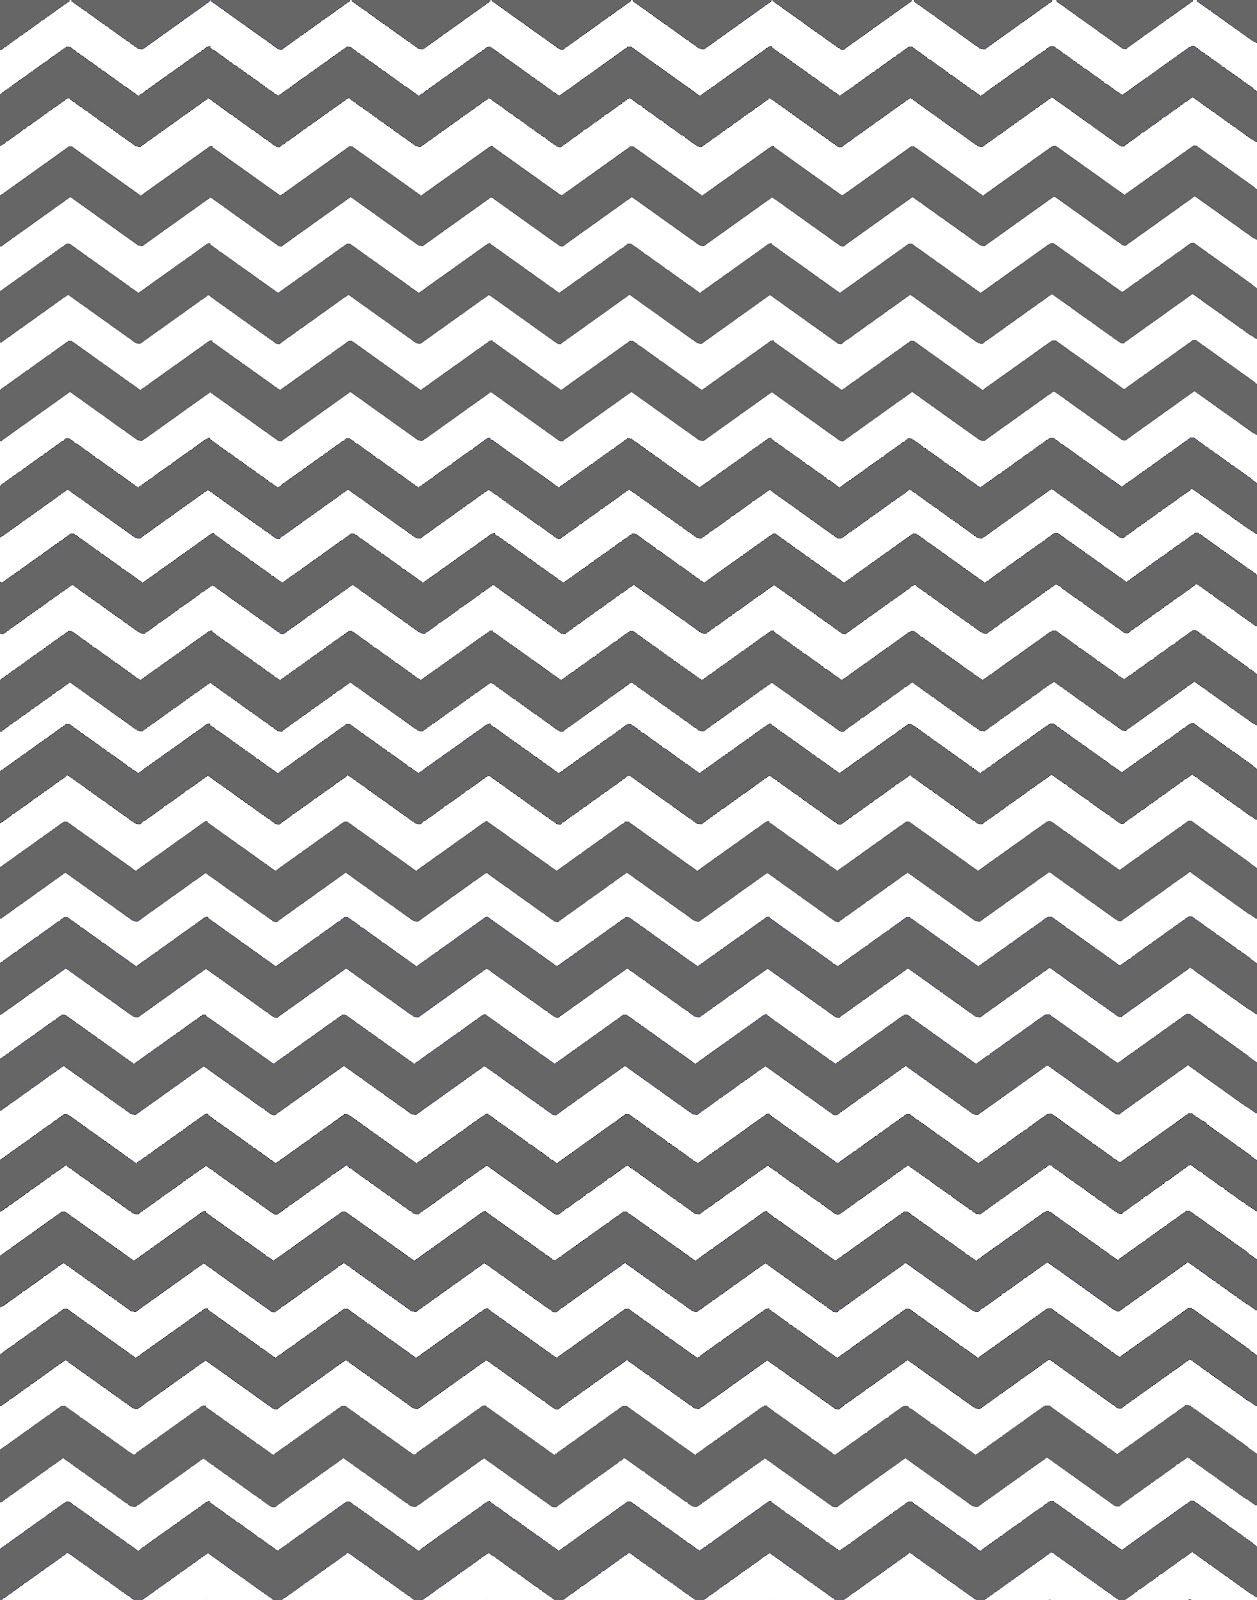 16 New Colors Chevron Background Patterns! In 2019 | Fonts, And - Chevron Pattern Printable Free